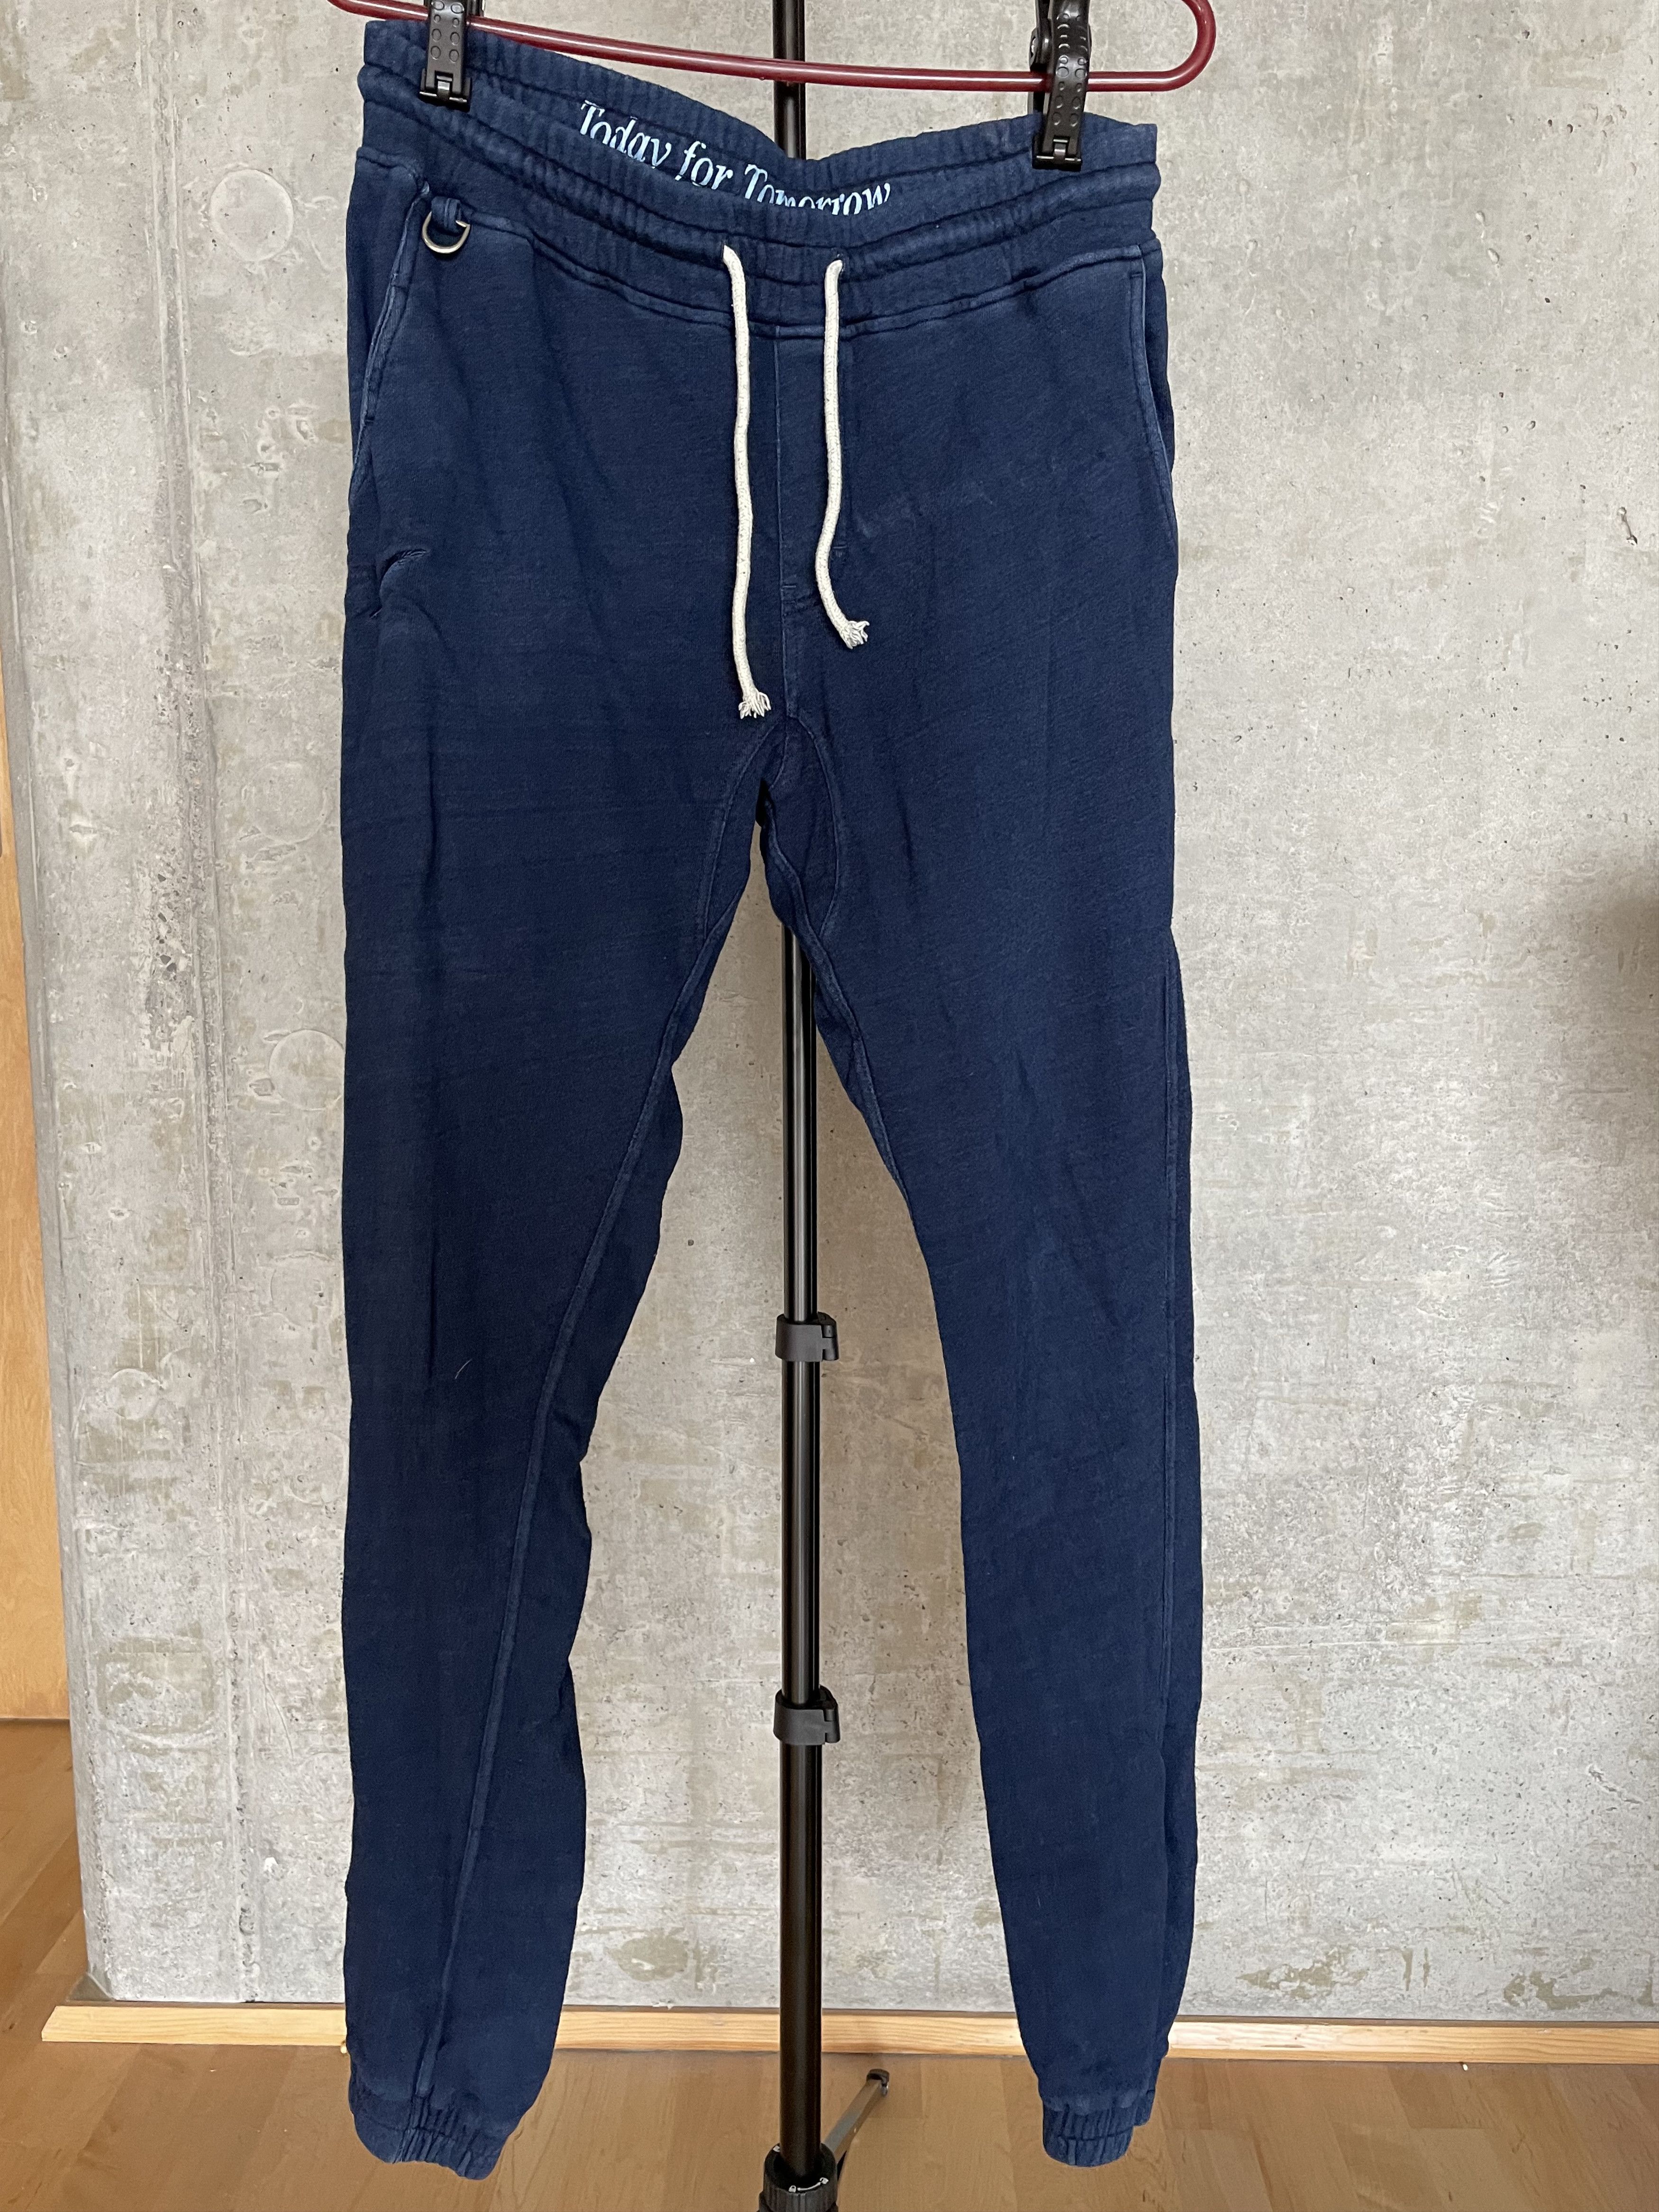 Publish Today For Tomorrow Blue Joggers | Grailed